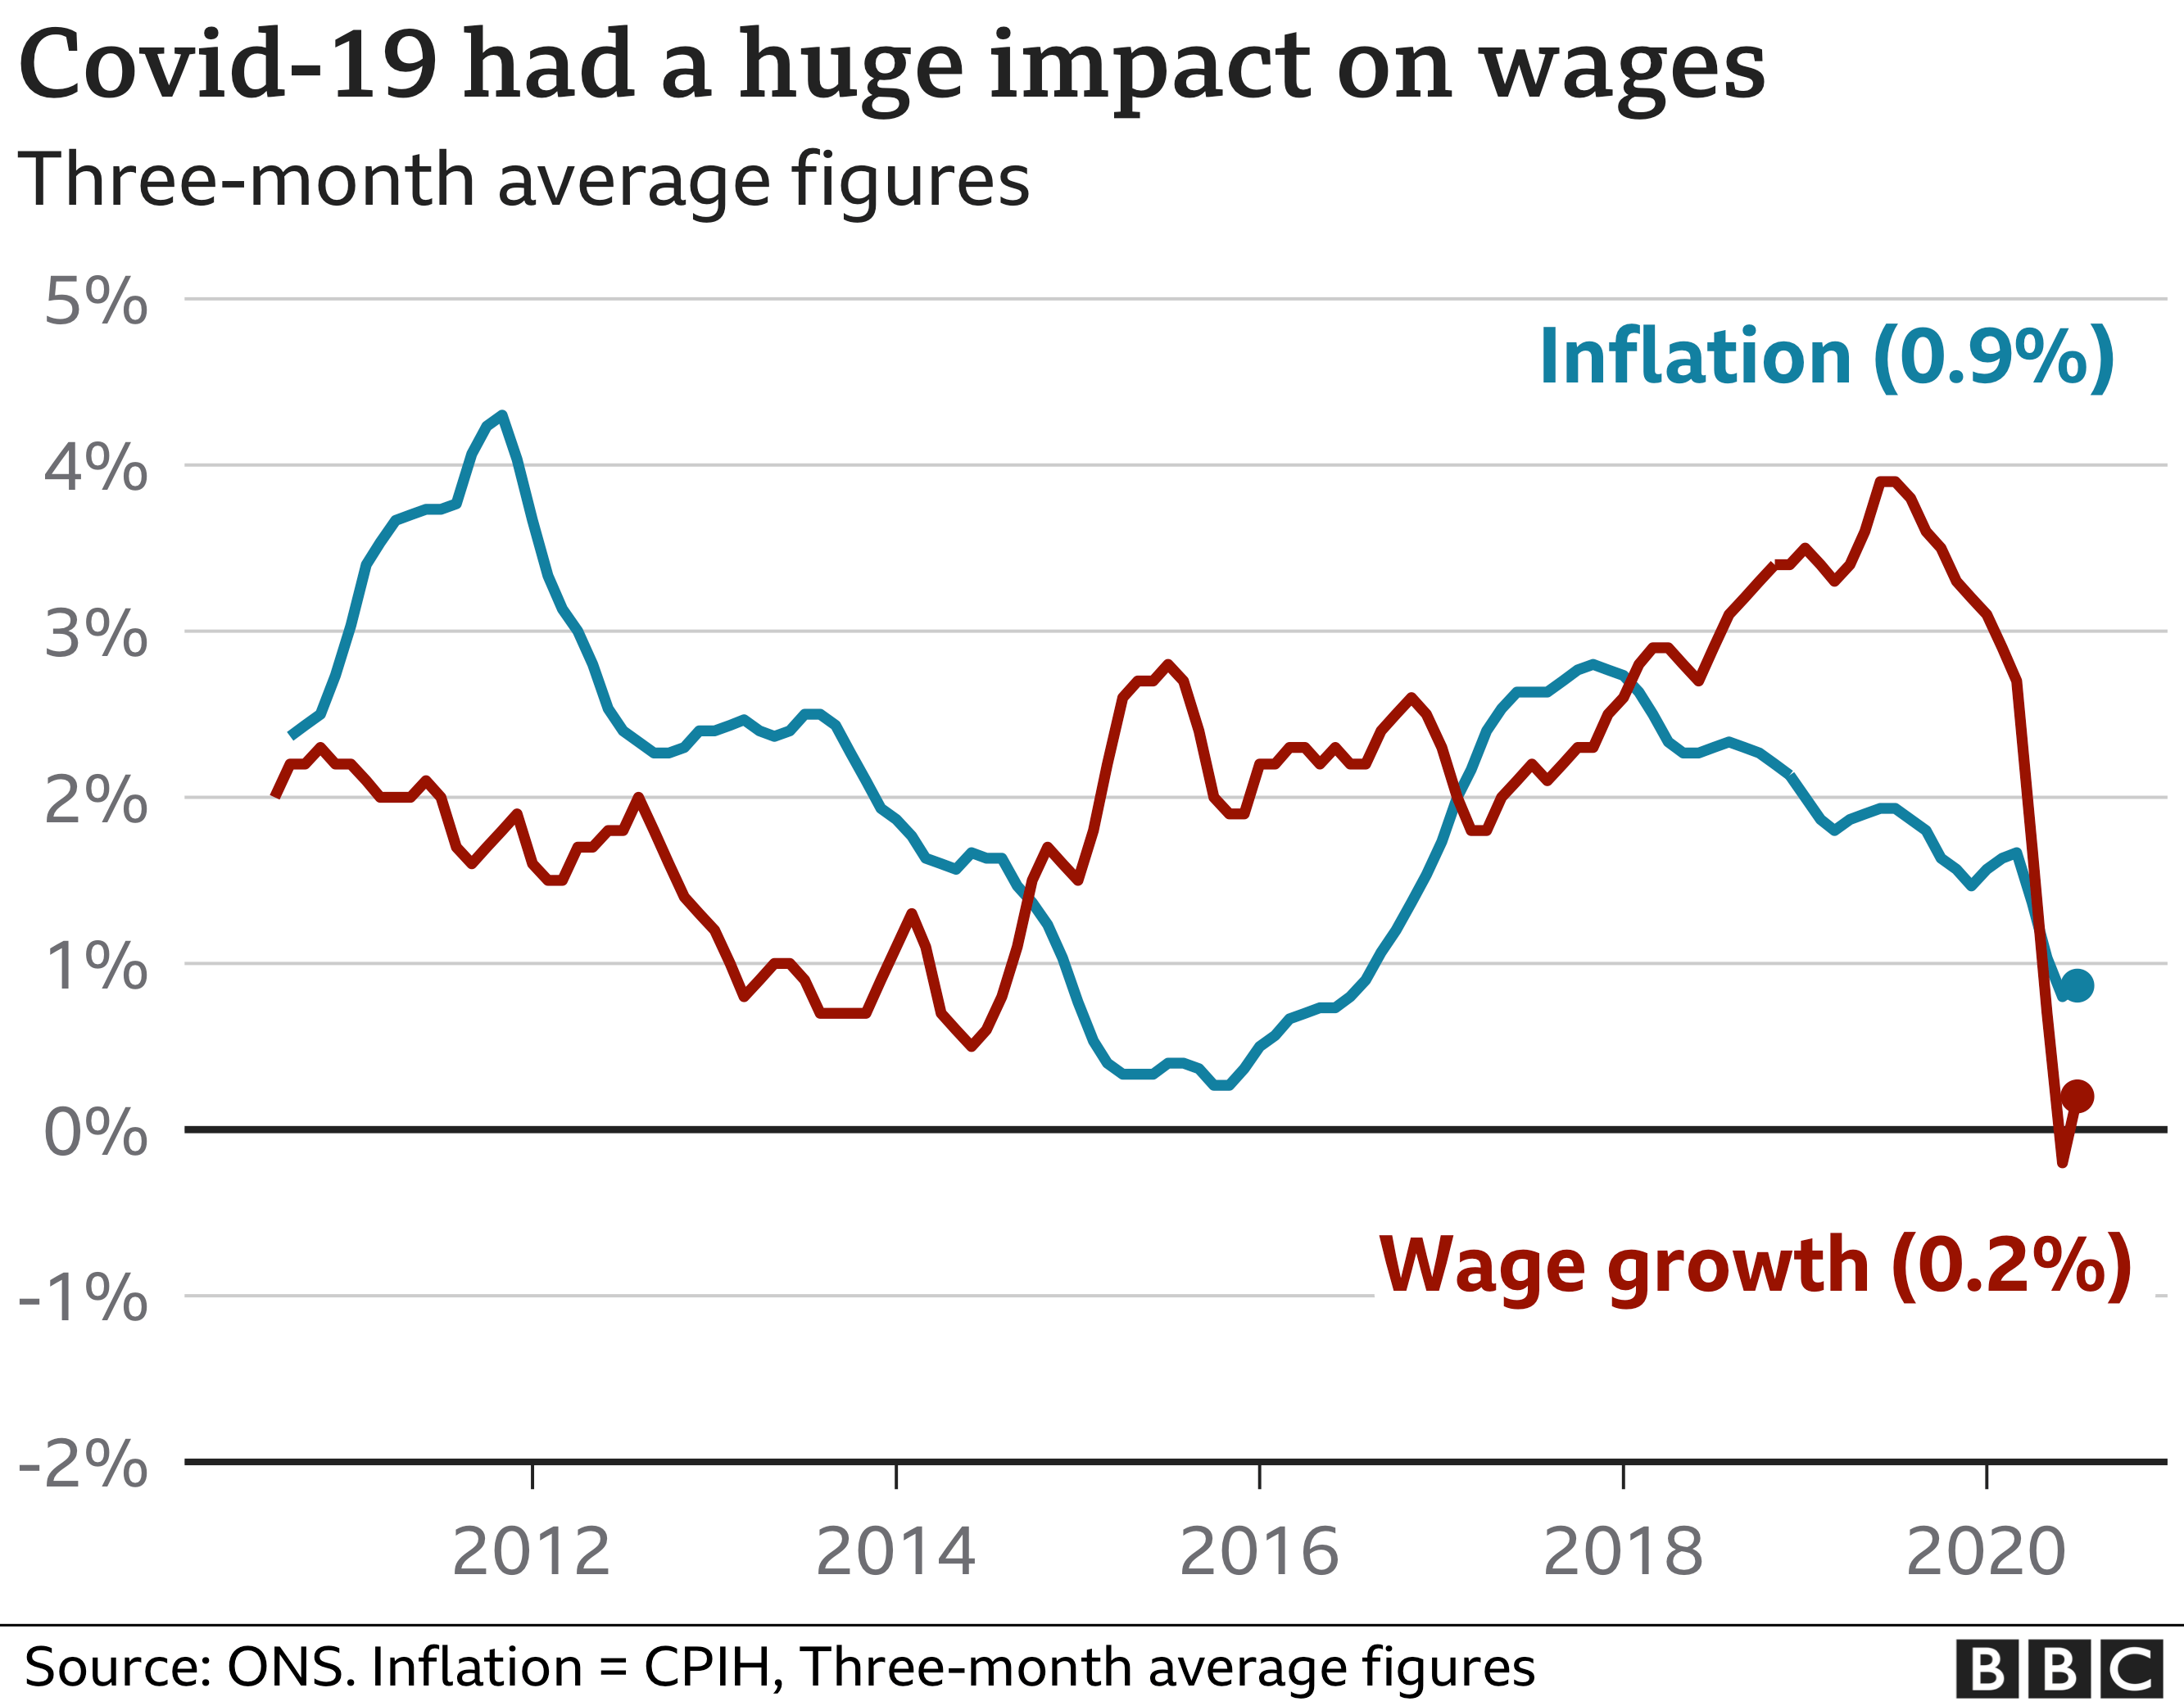 wages and inflation